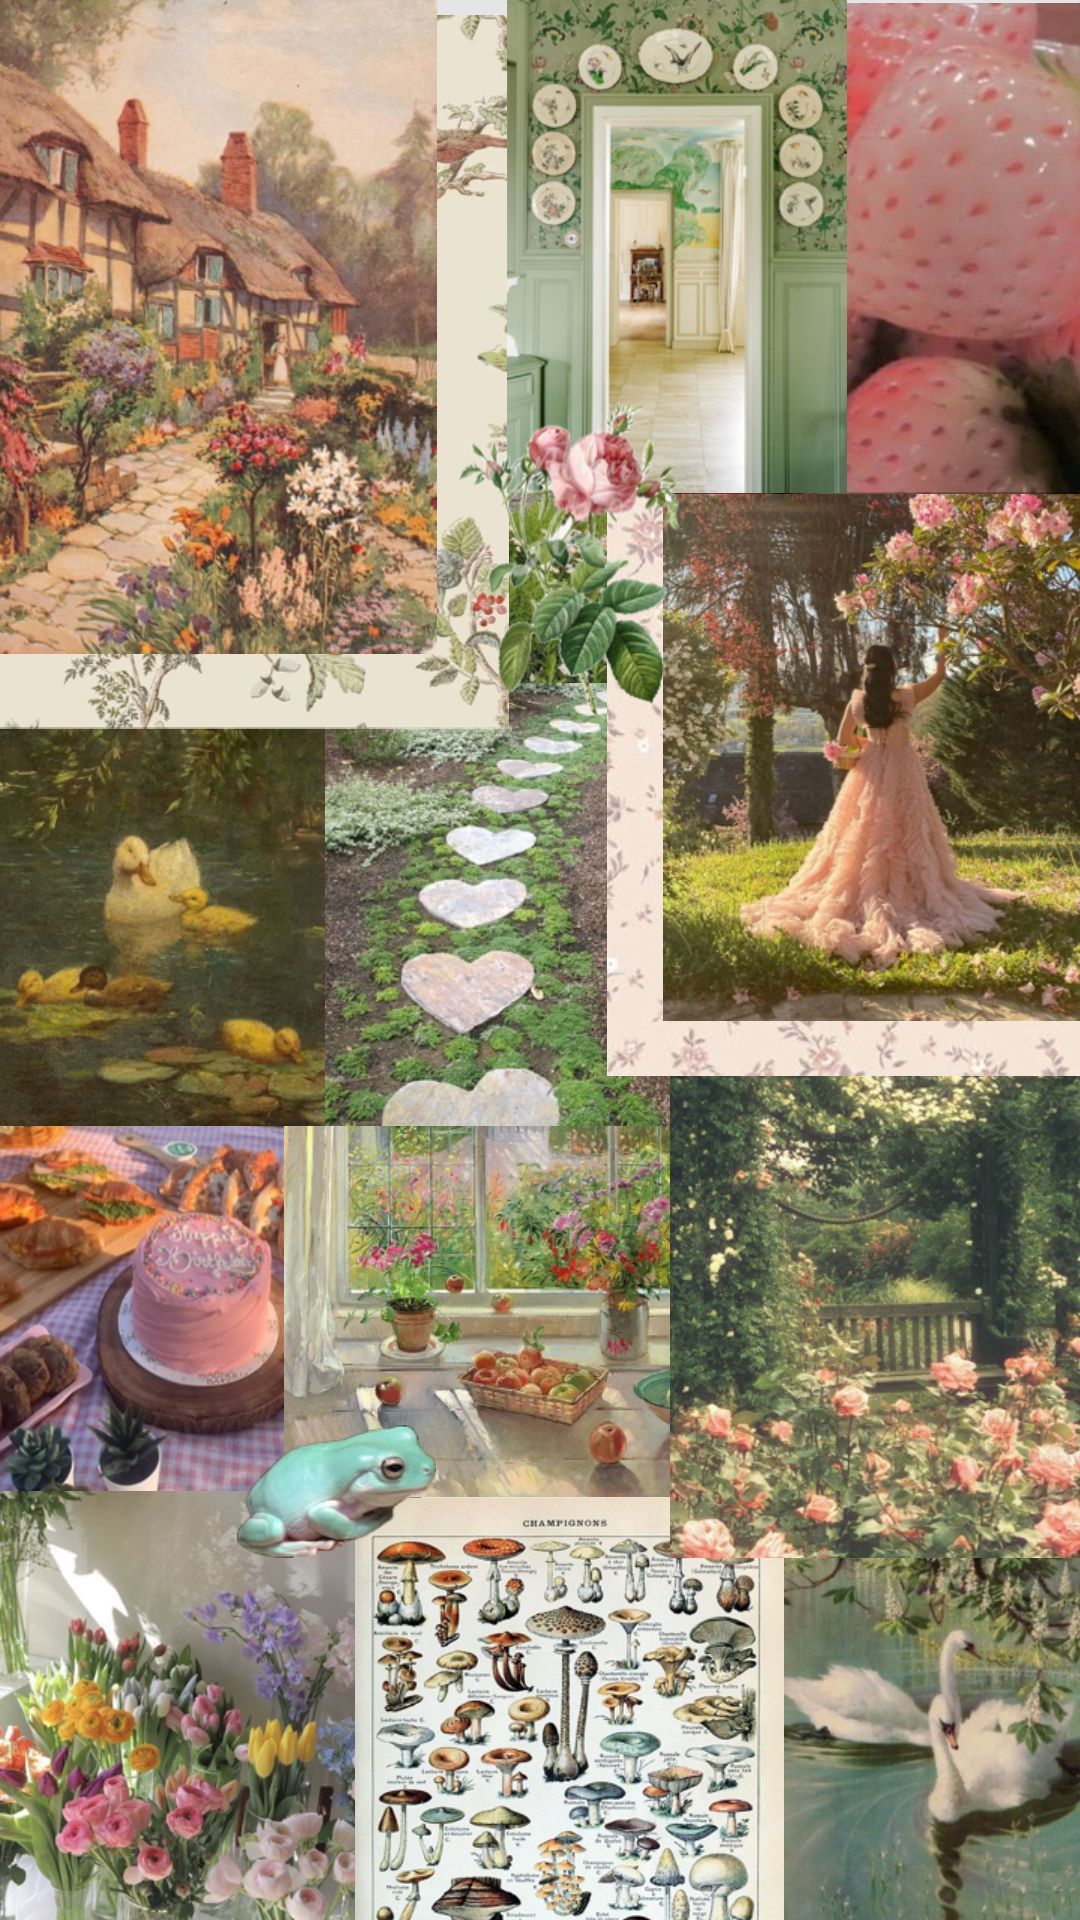 #cottagecore #cottagecoreaesthetic #cottage #cottagecorevibes #pinkandgreen #pastel #wallpaper #collageart #collages #aesthetic #vibes #art #floral #flowers #nature #animals #frog #mushrooms #duck #strawberry